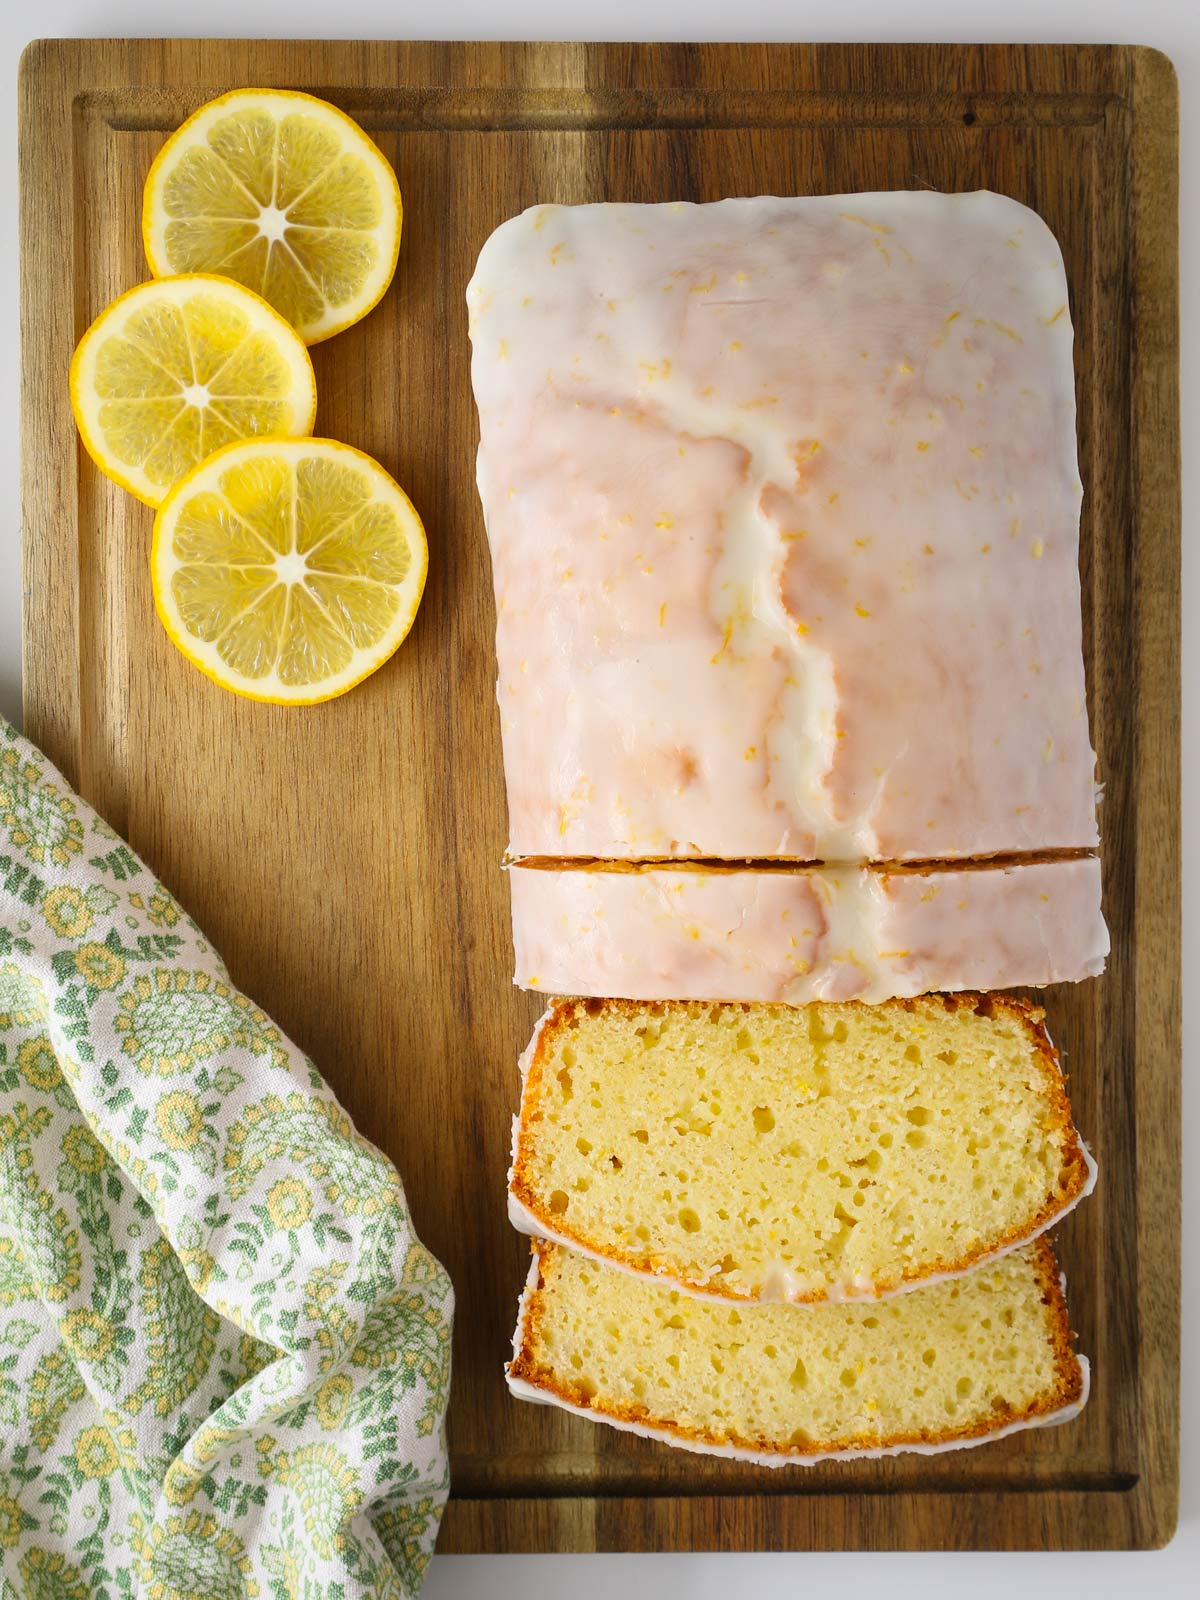 lemon loaf on board, sliced, with lemon slices and a yellow and green towel.